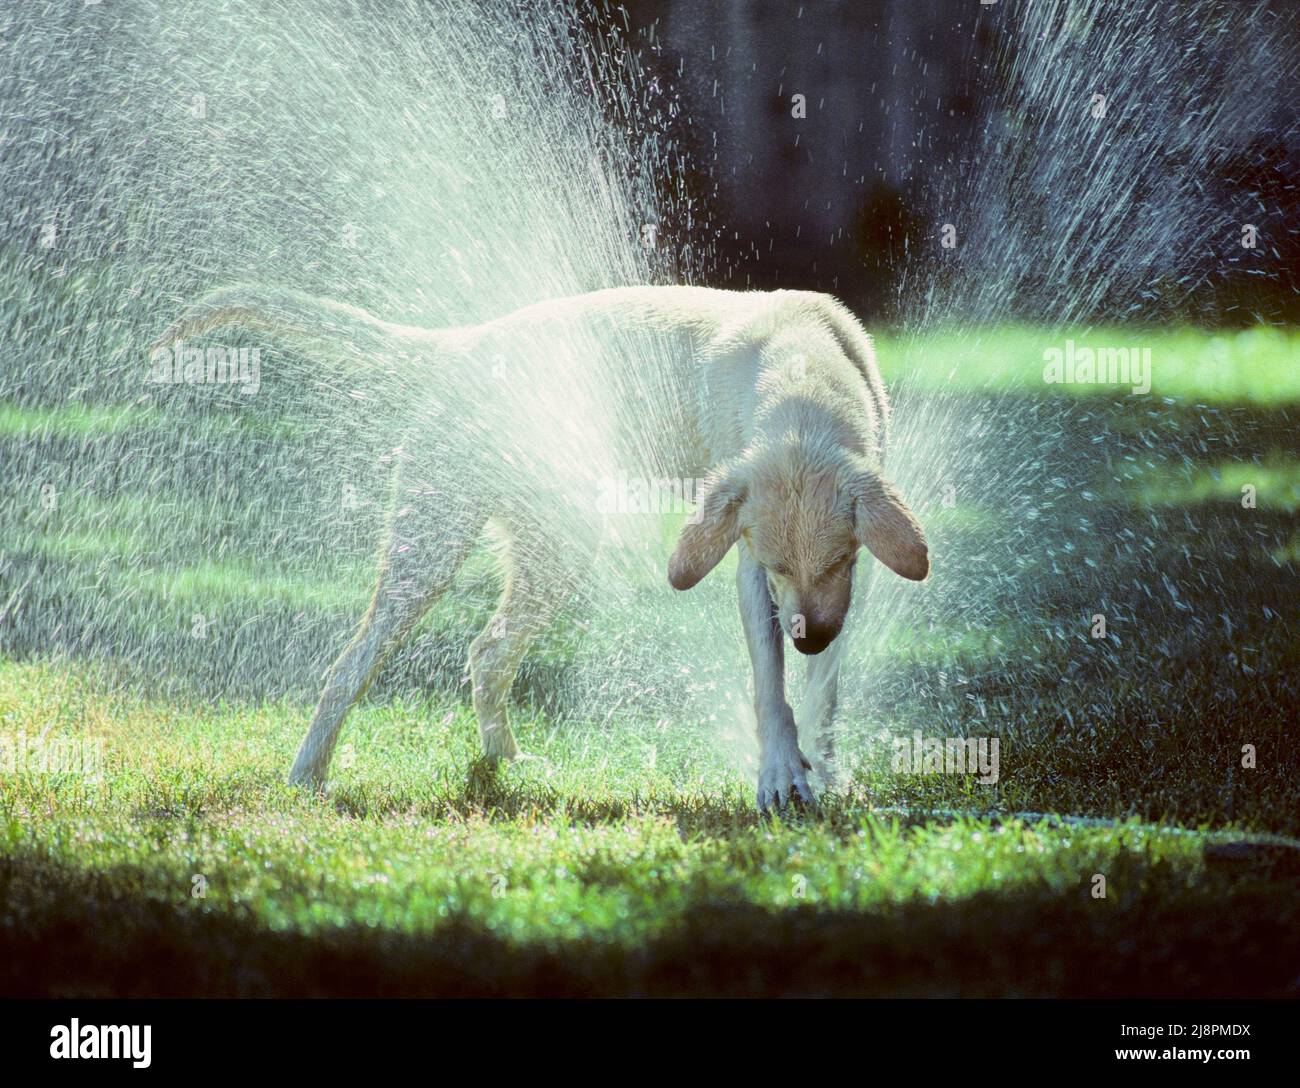 A dog and a lawn sprinkler Stock Photo